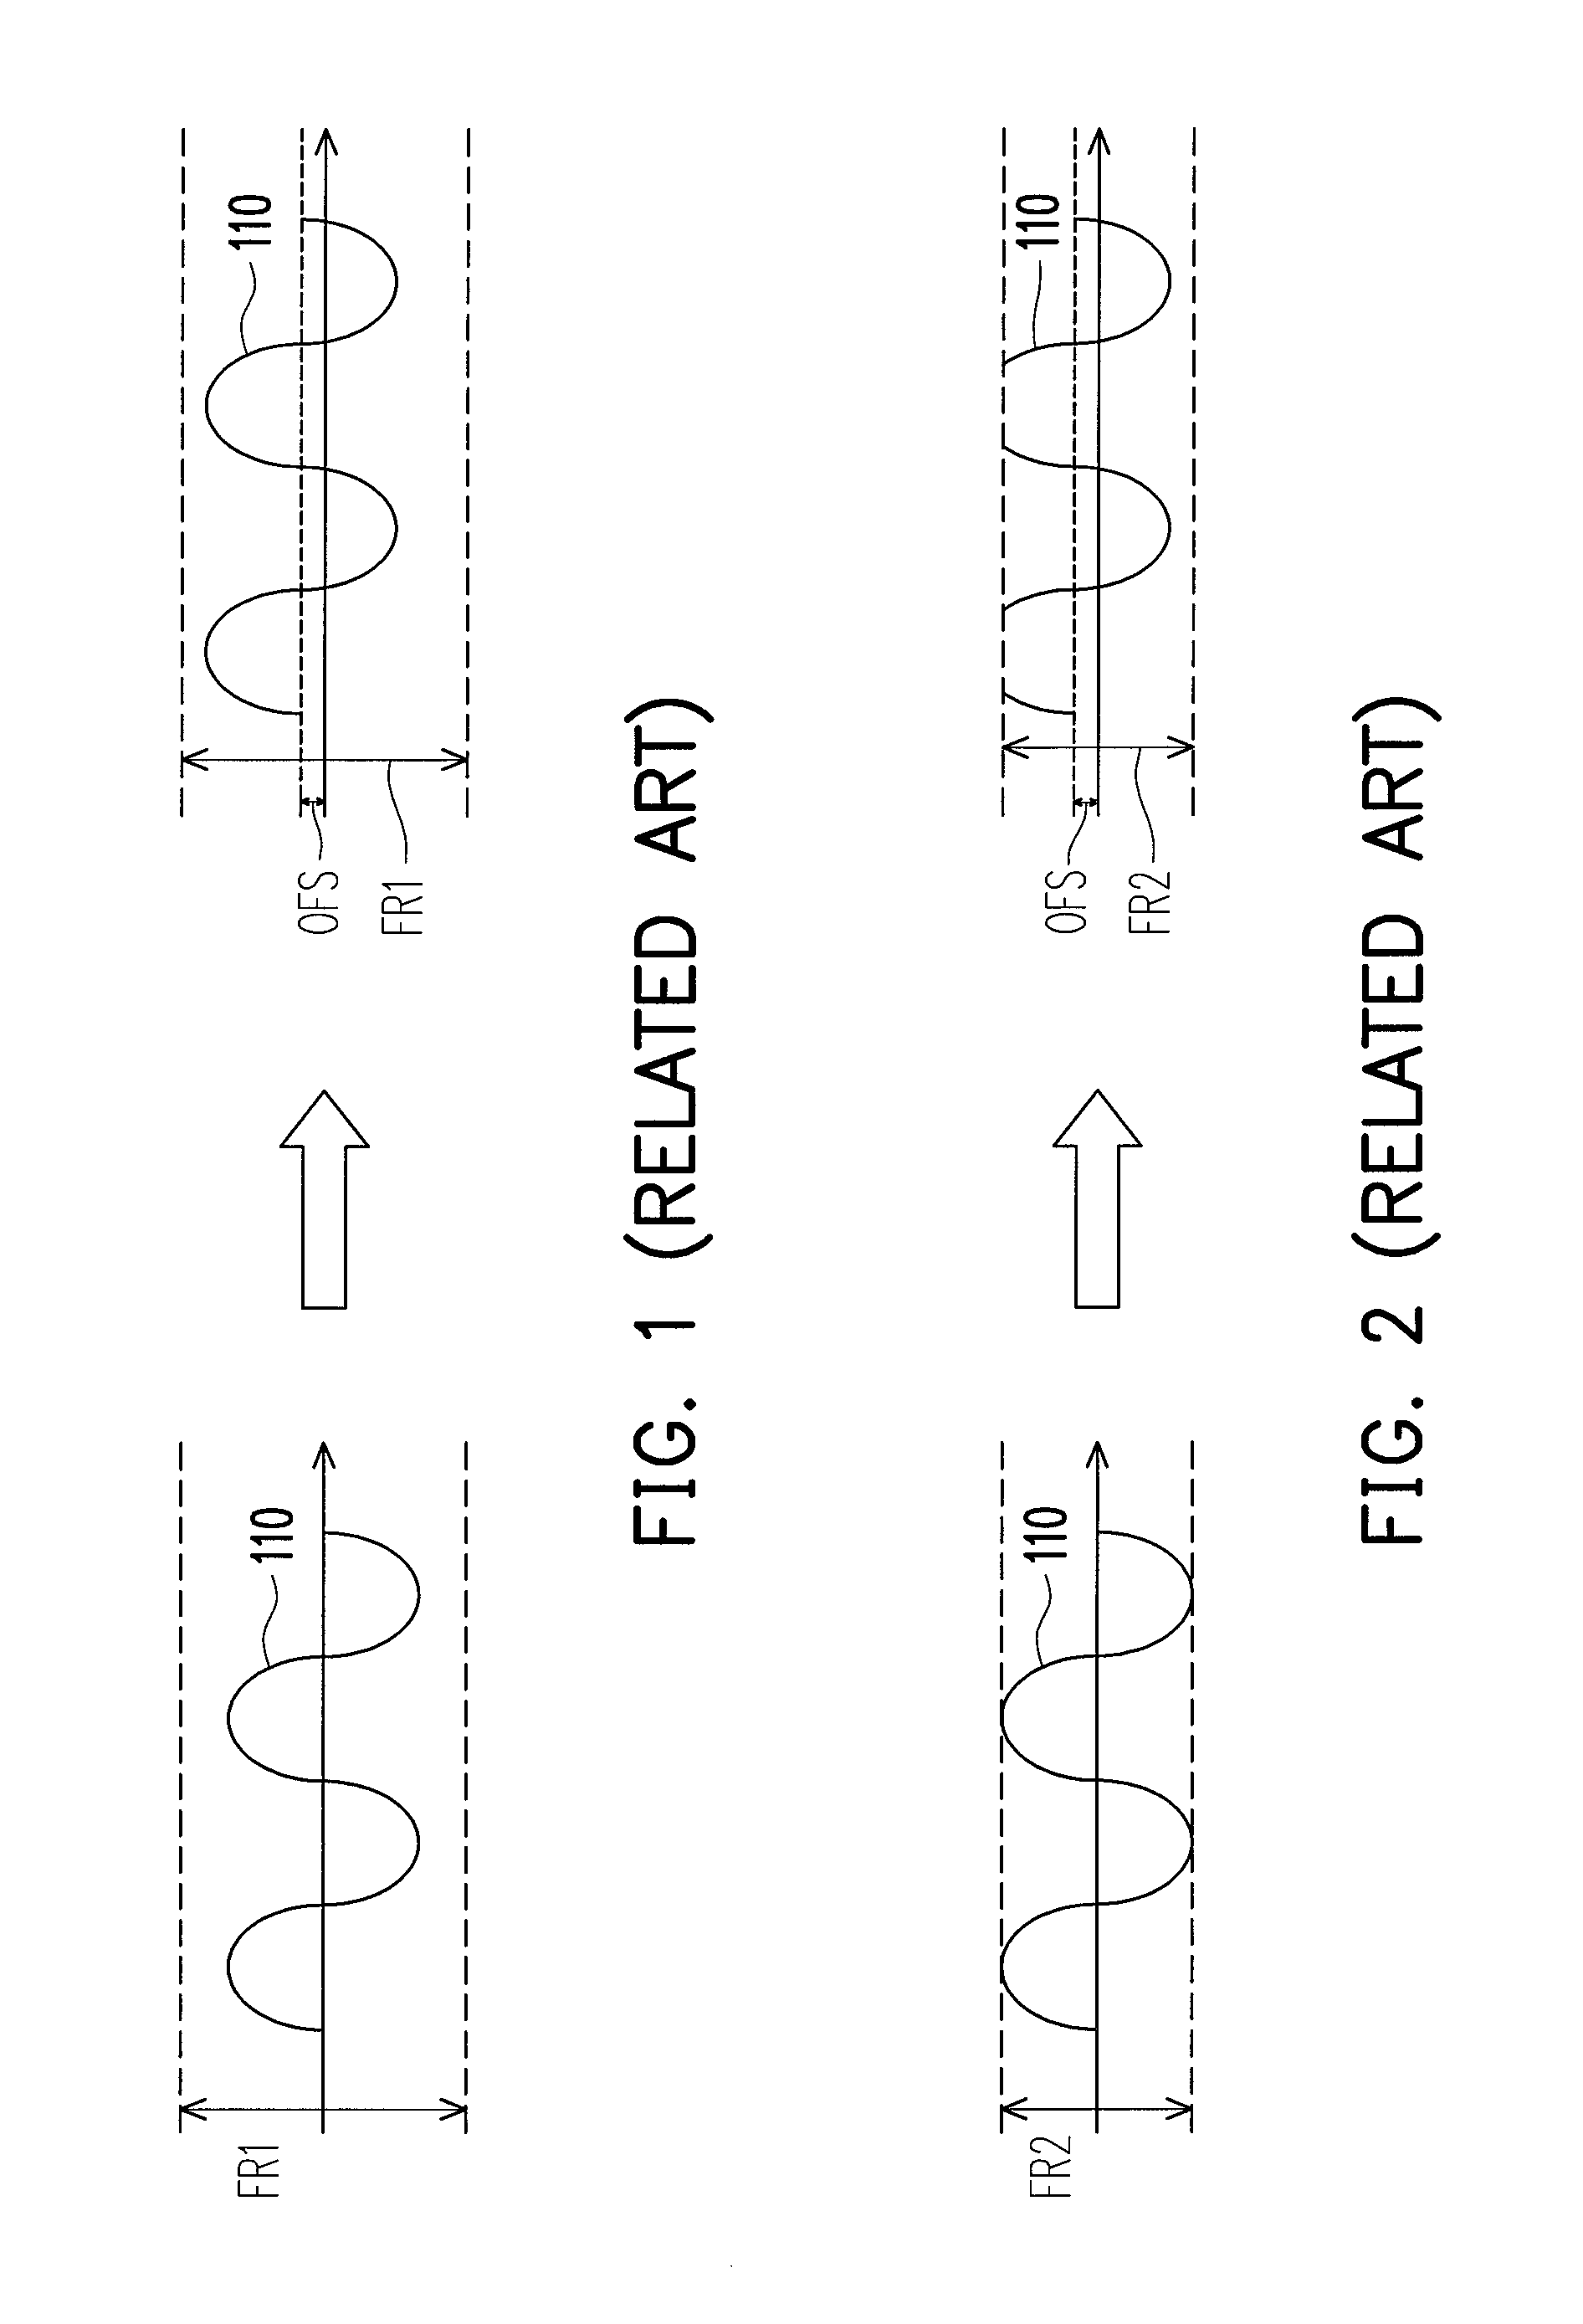 Differential offset calibration circuit